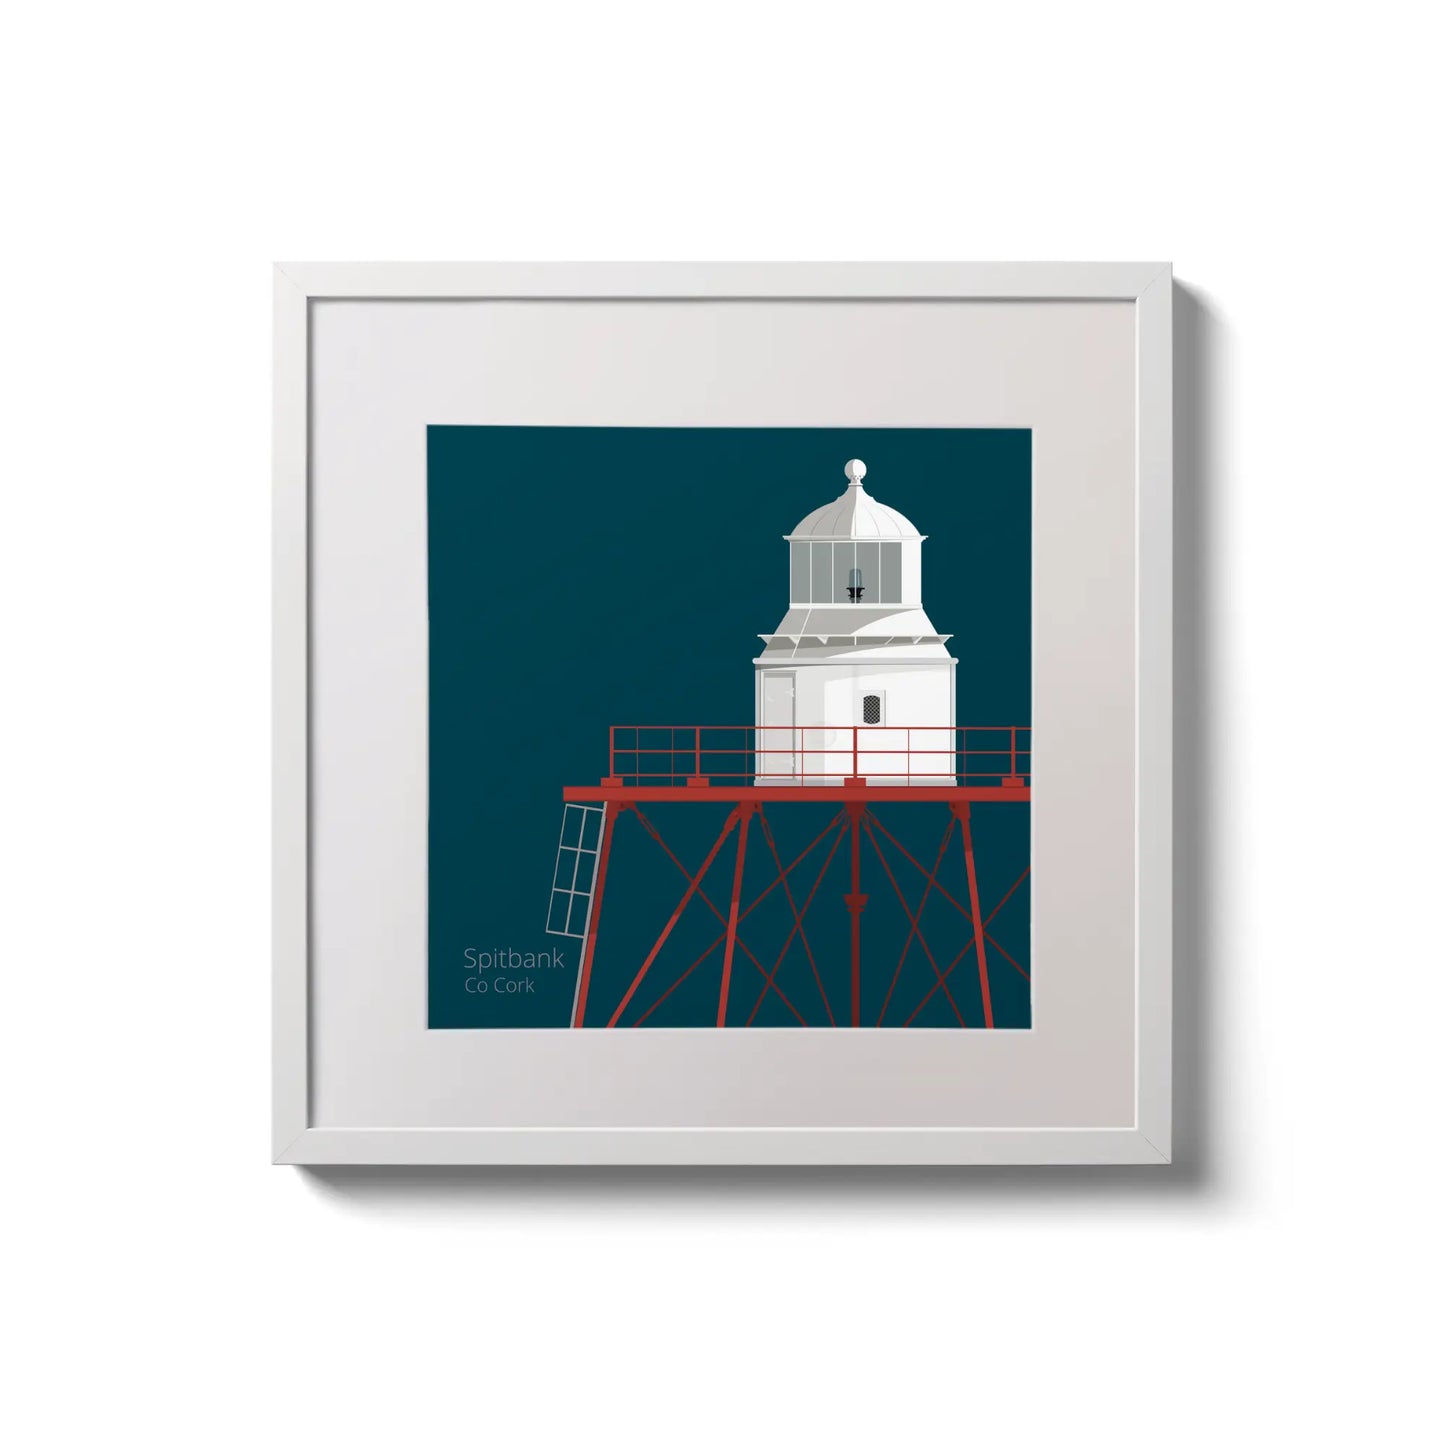 Illustration of Spitbank lighthouse on a midnight blue background,  in a white square frame measuring 20x20cm.